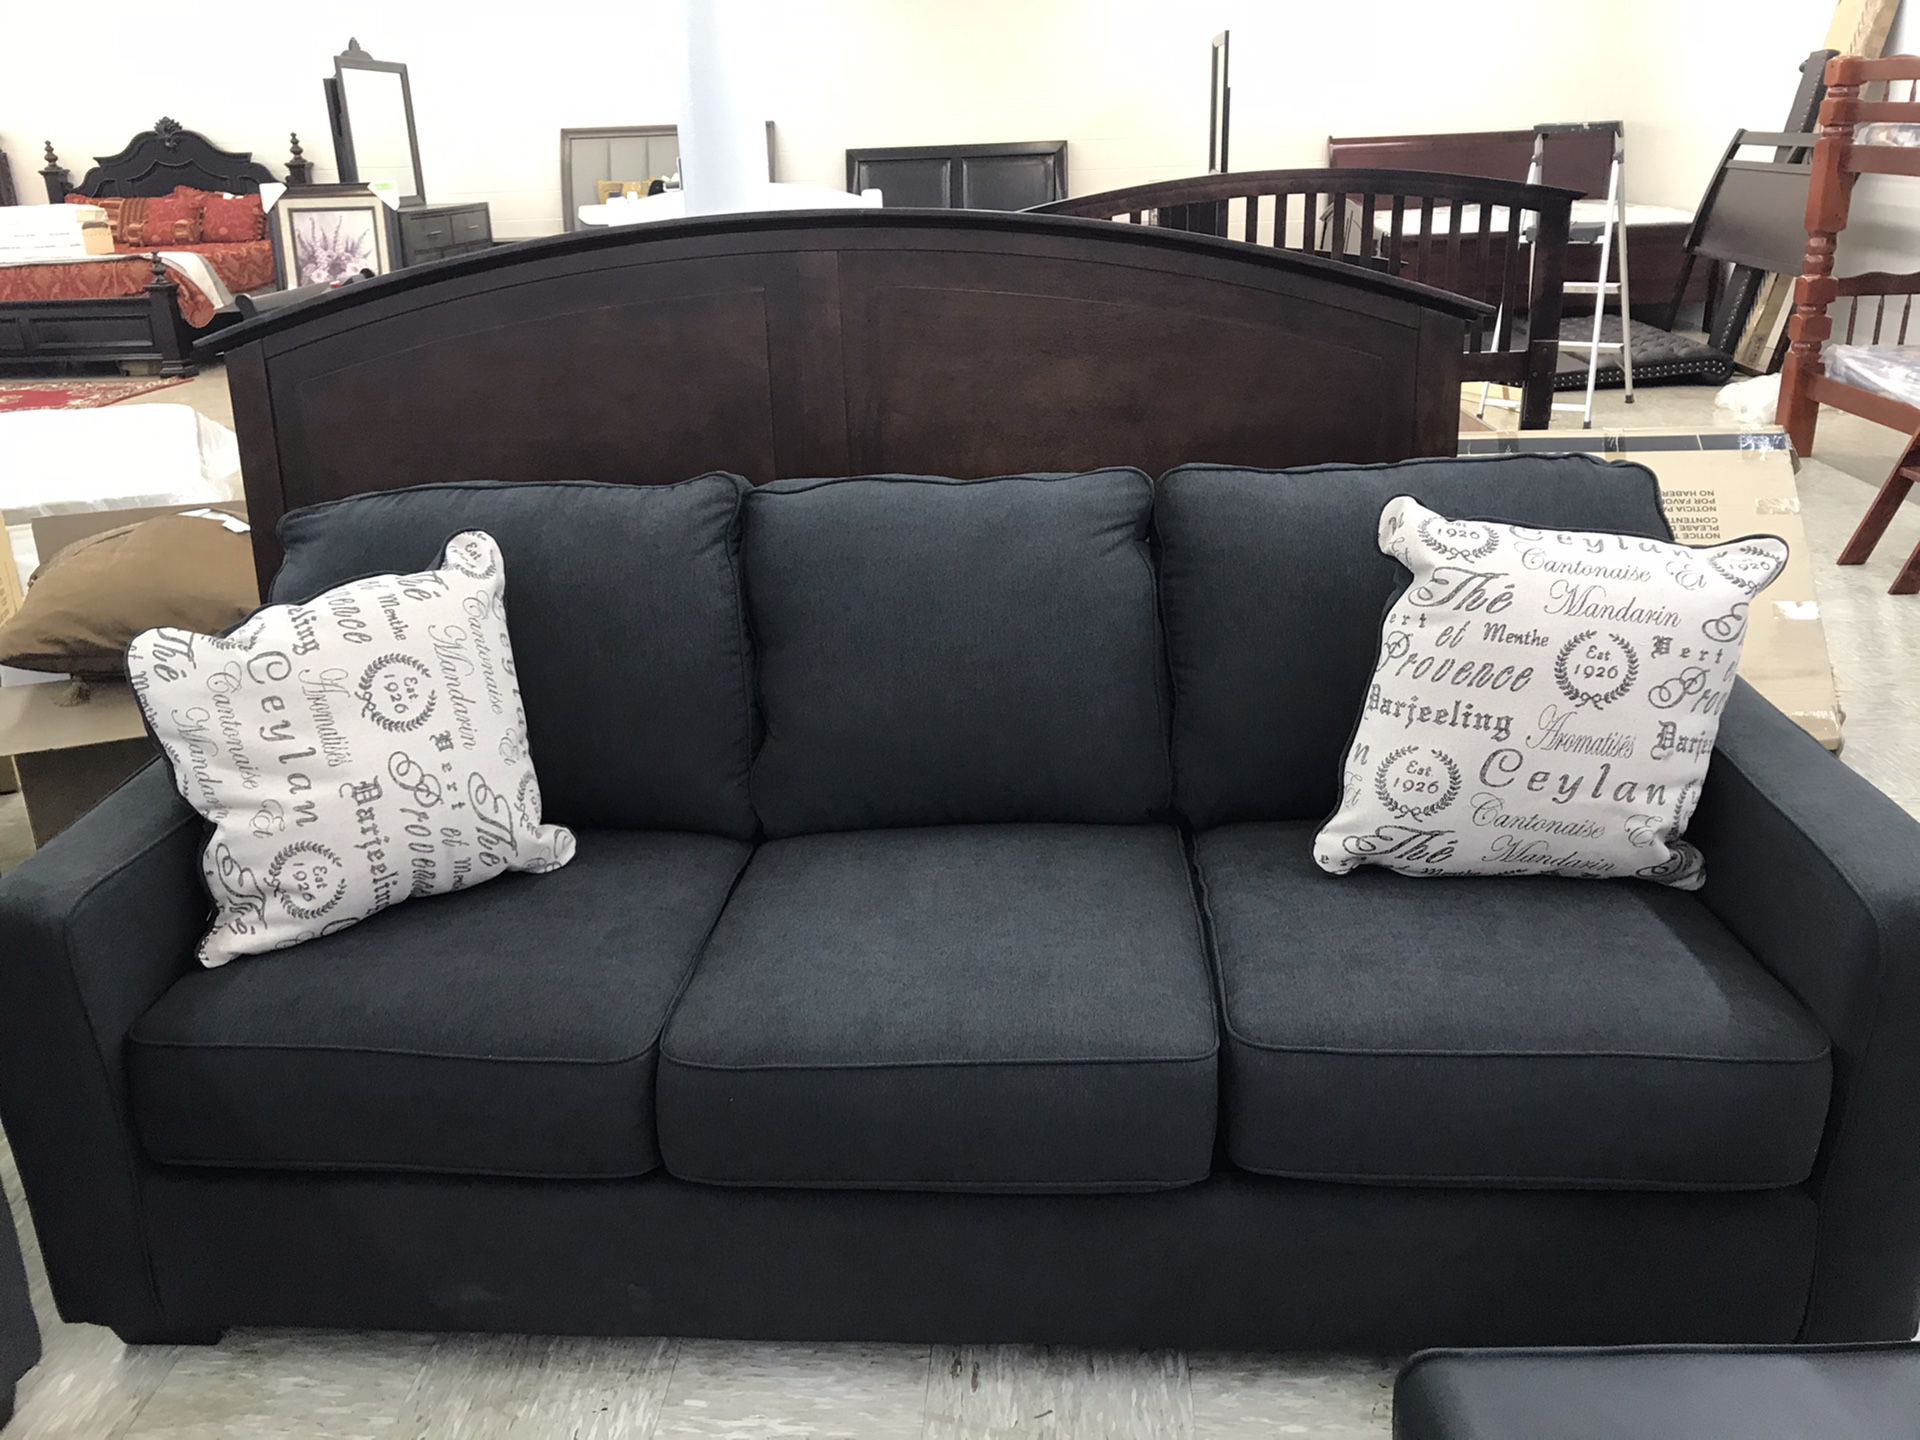 SOFA BED {contact info removed} TORRE FUERTE FURNITURE